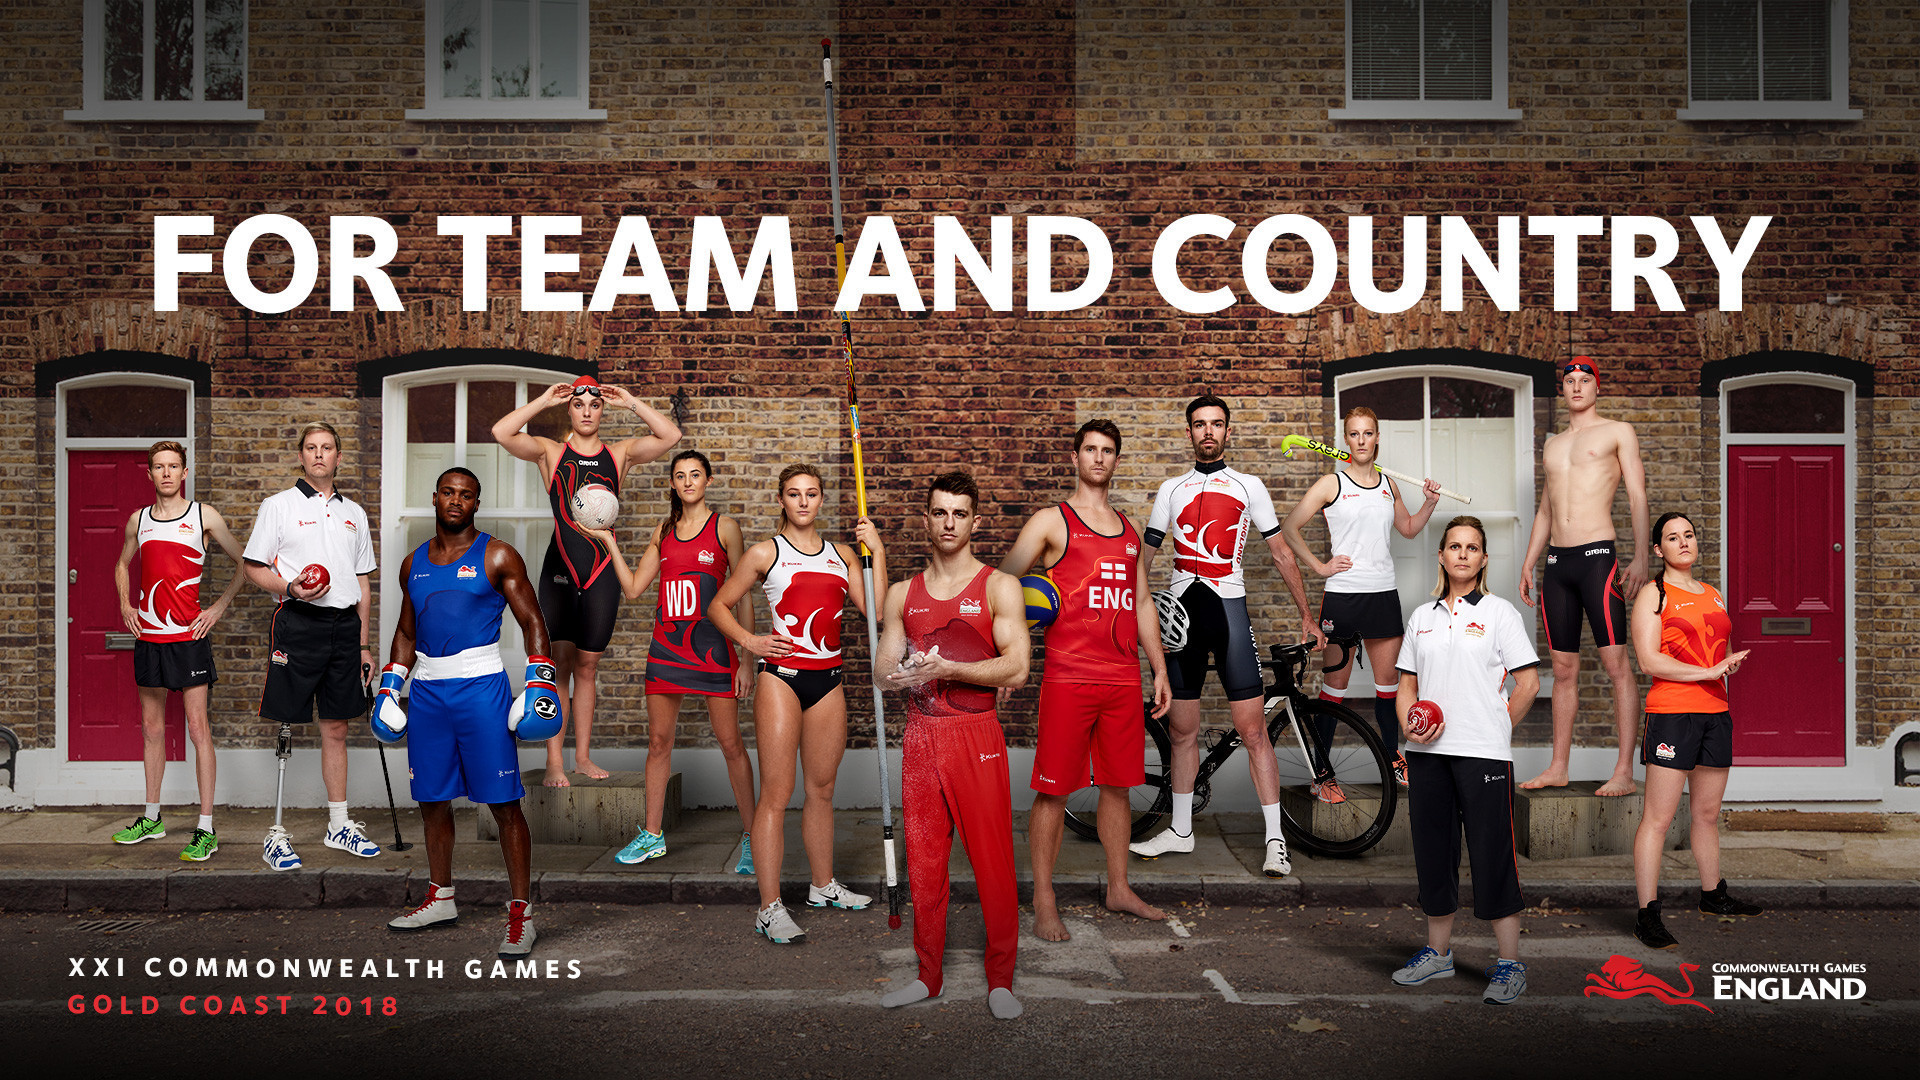 Kukri designed England's kit for the upcoming Commonwealth Games ©CGE